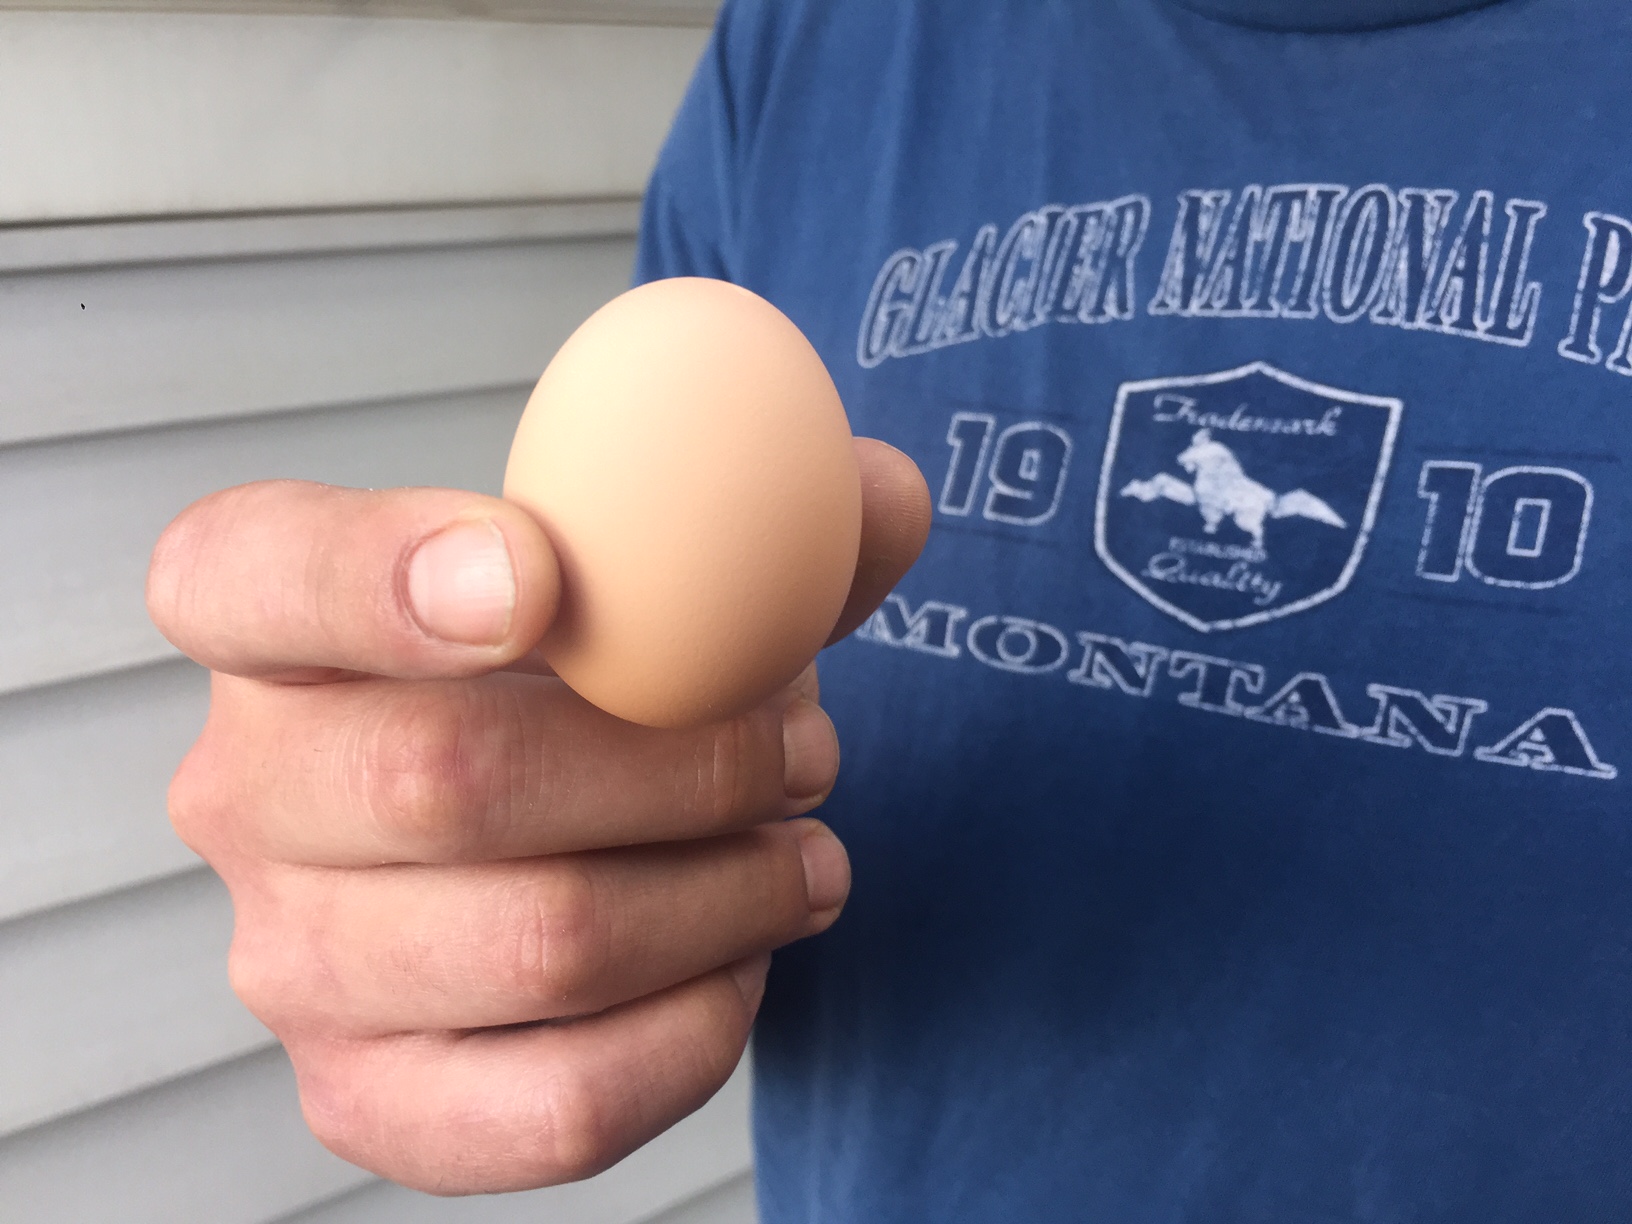 We think both of these brown eggs are from Ocean, the Black Australorp.